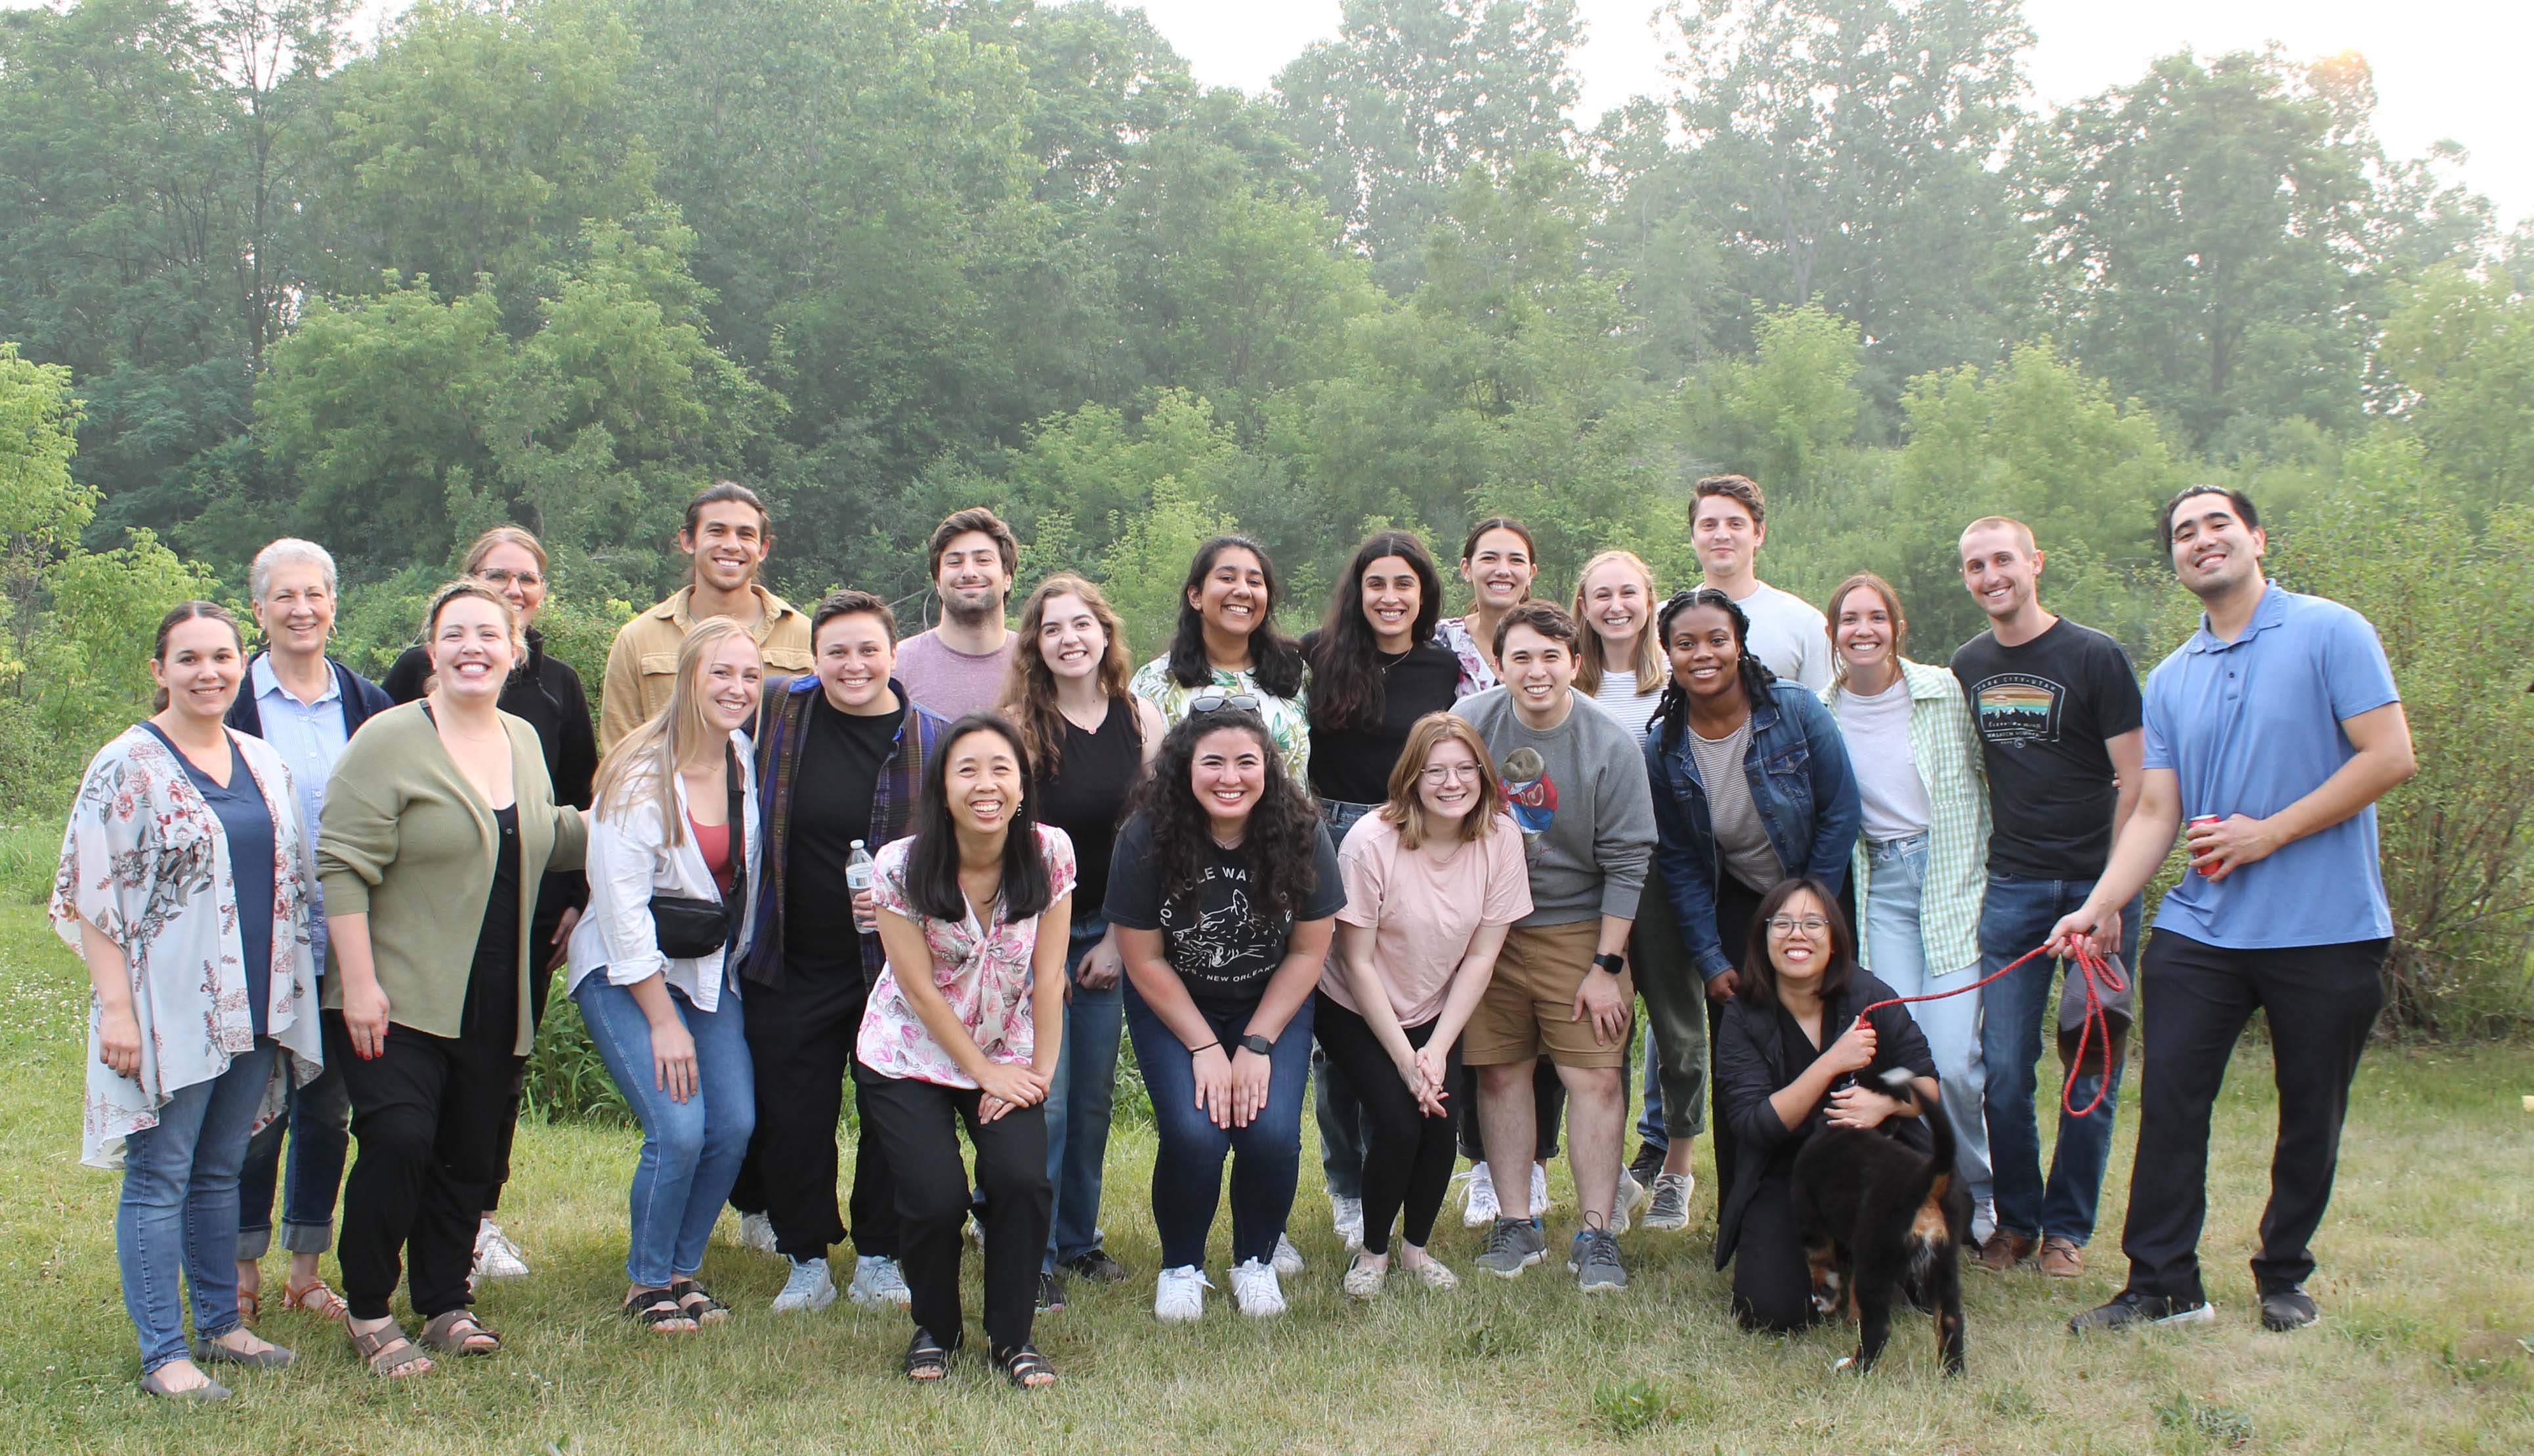 A group of 23 people stand gathererd together looking at the camera and smiling. They are standing outside in front of green trees. One holds a dog leash with a black dog. 